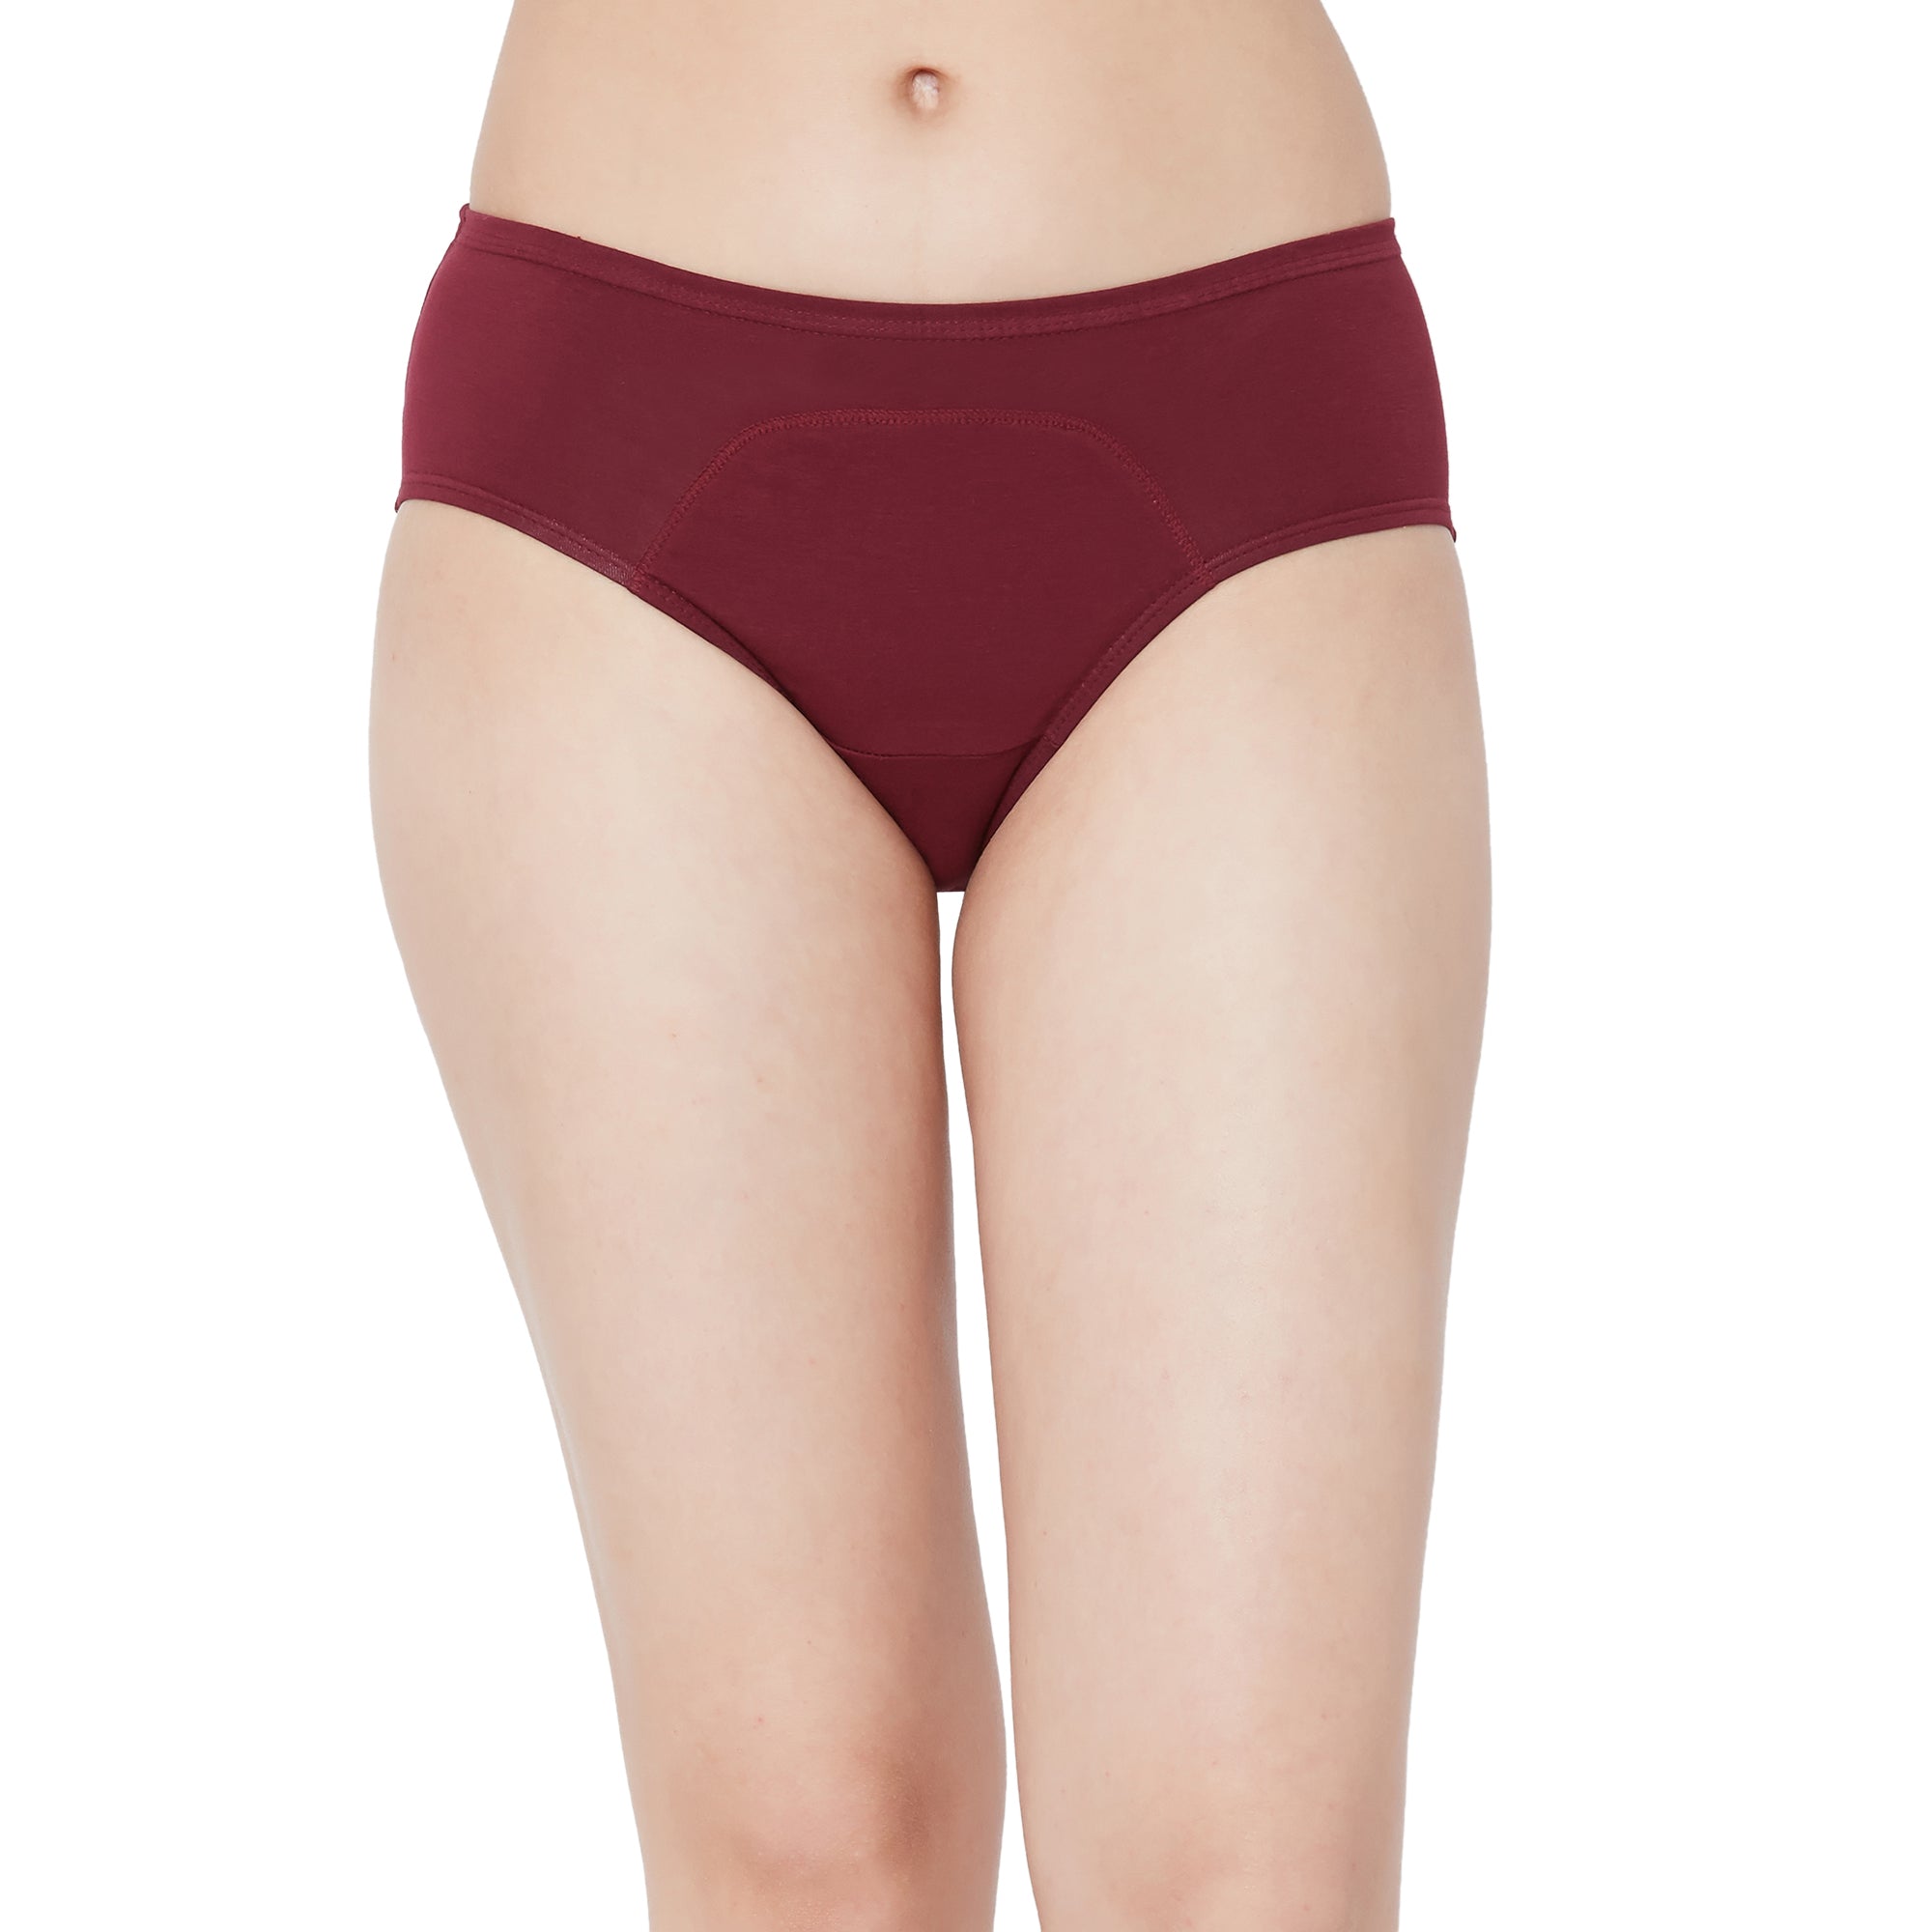 Period Panty Mid Rise No Stain Maroon